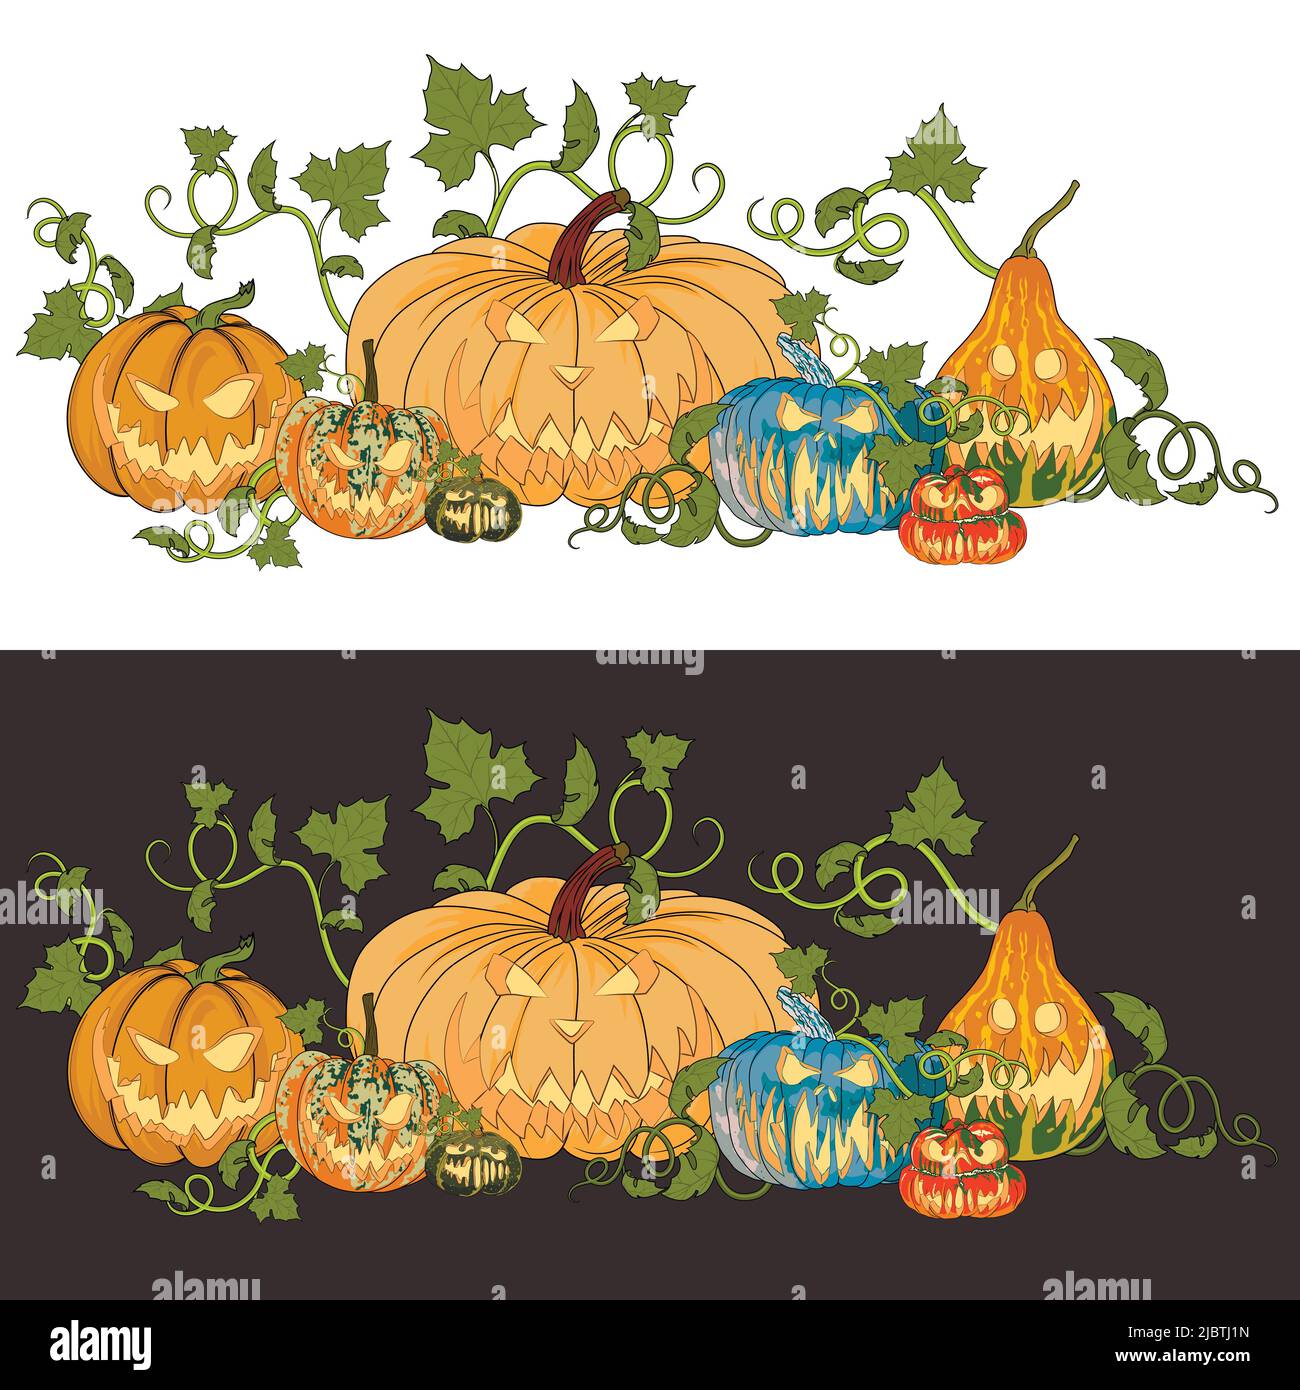 Two illustrations of pumpkins for Halloween on a white and dark background. Funny faces on different varieties of pumpkins. Stock Vector